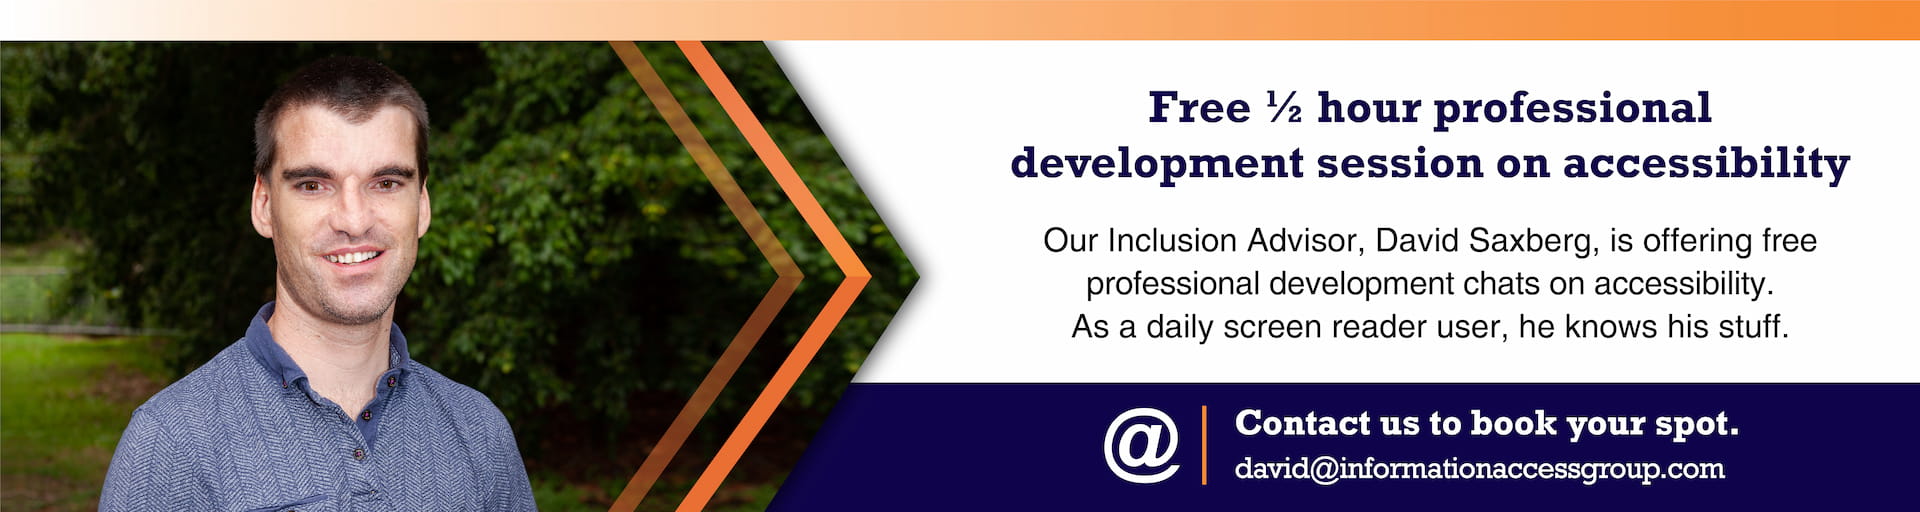 Free half hour professional development session on accessibility. Our Inclusion Advisor, David Saxberg, is offering free professional development chats on accessibility. As a daily screen reader user, he knows his stuff. Contact us to book your spot.